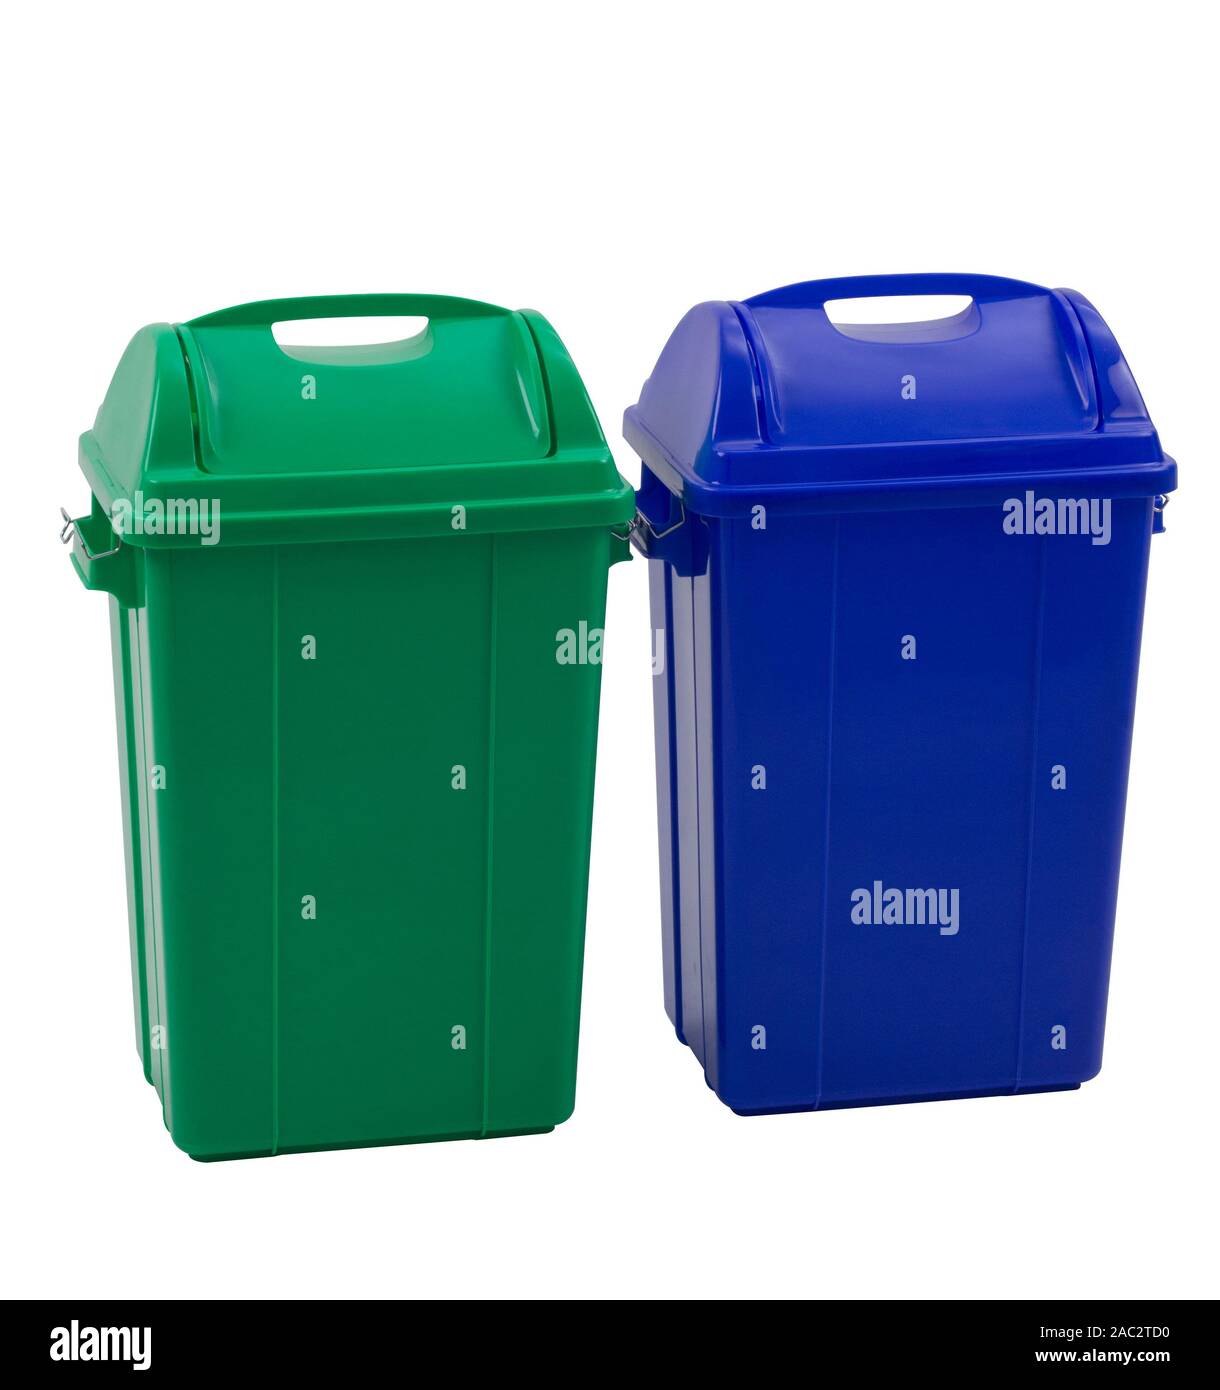 Different colored trash bins for collecting various type of garbage isolated on white background Stock Photo